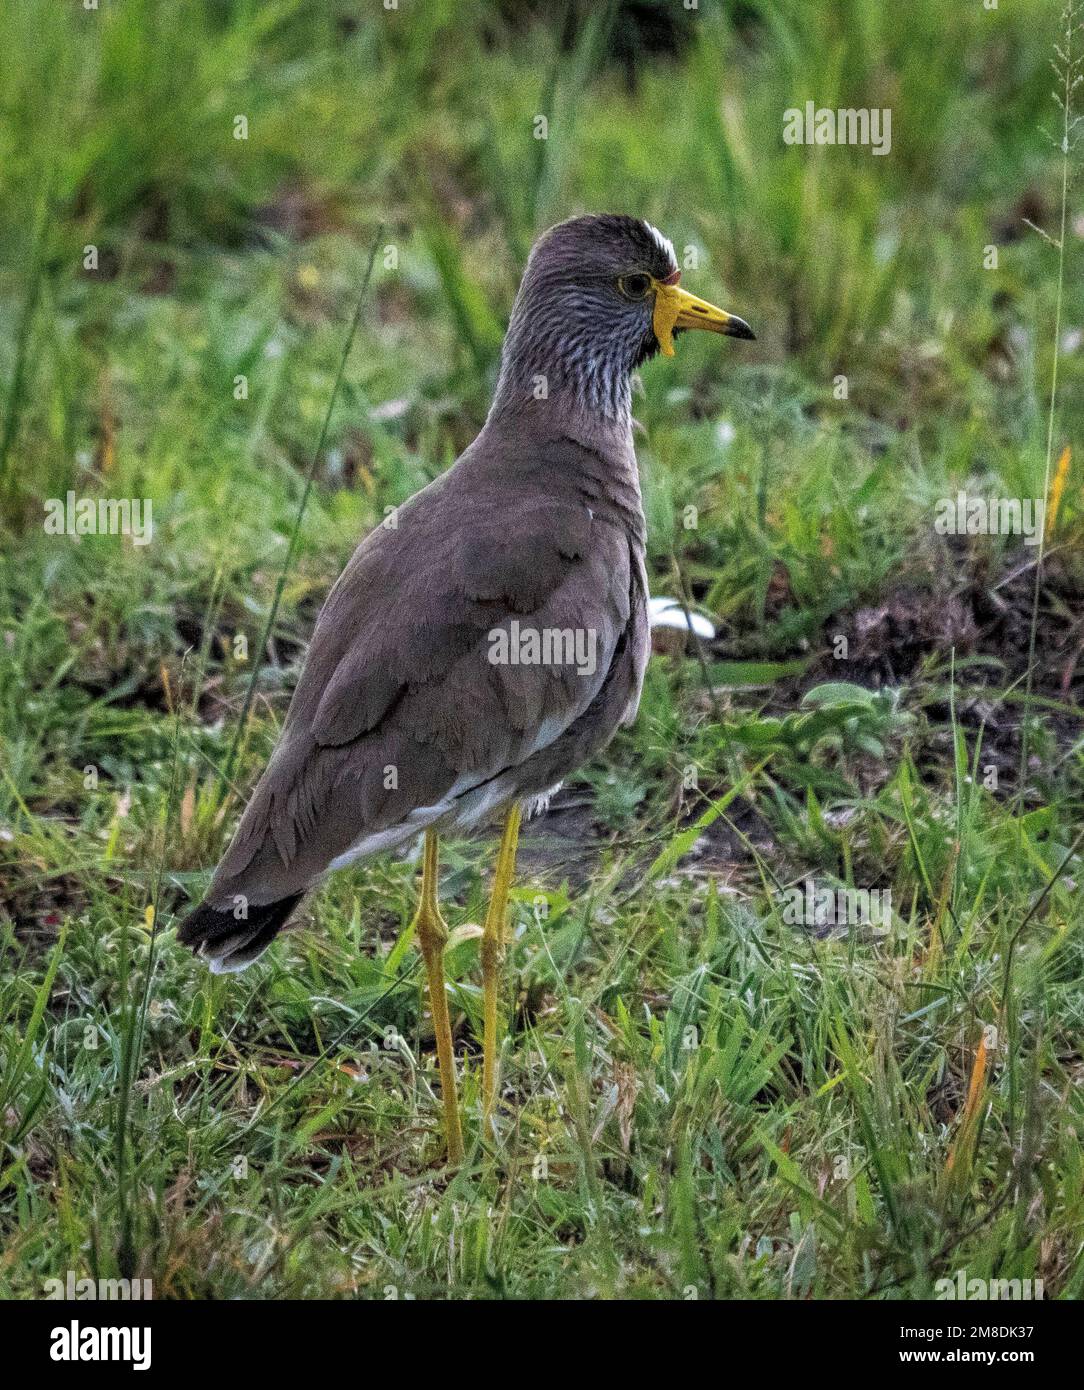 African wattled lapwing (Vanellus senegallus), also known as the Senegal wattled plover or simply wattled lapwing, Masai Mara, Kenya, Africa Stock Photo